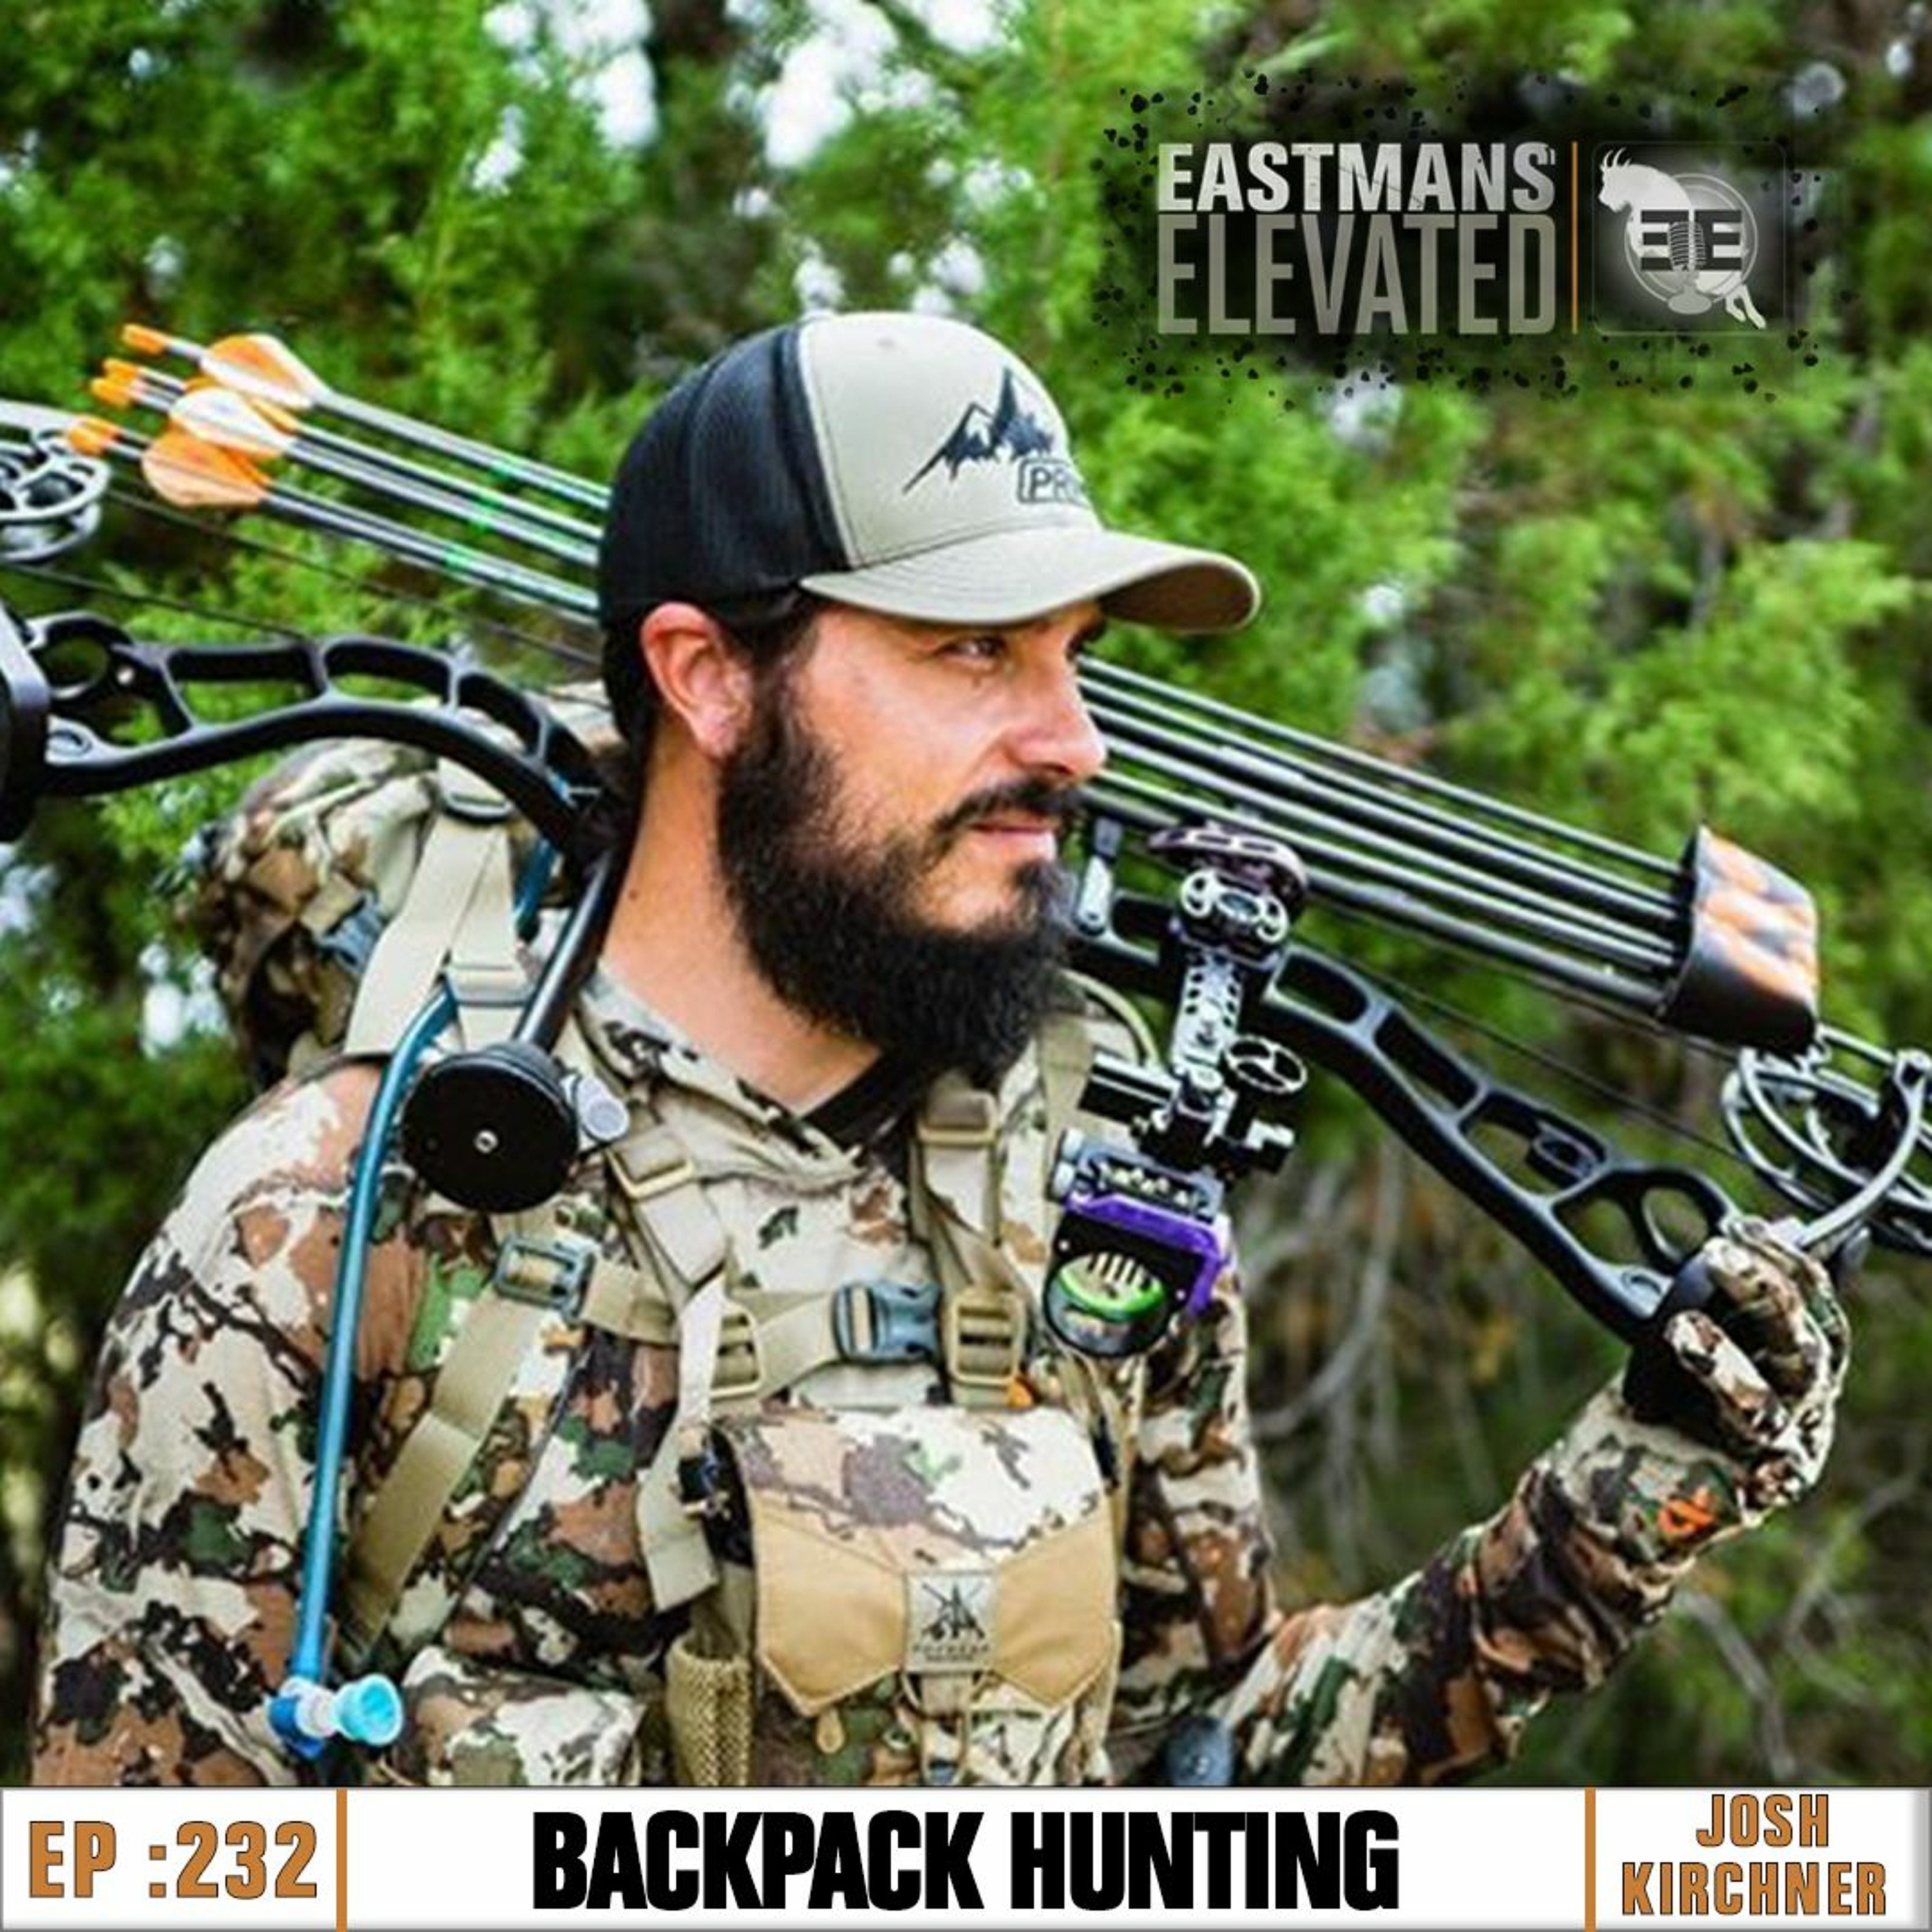 Episode 232: Backpack Hunting with Josh Kirchner